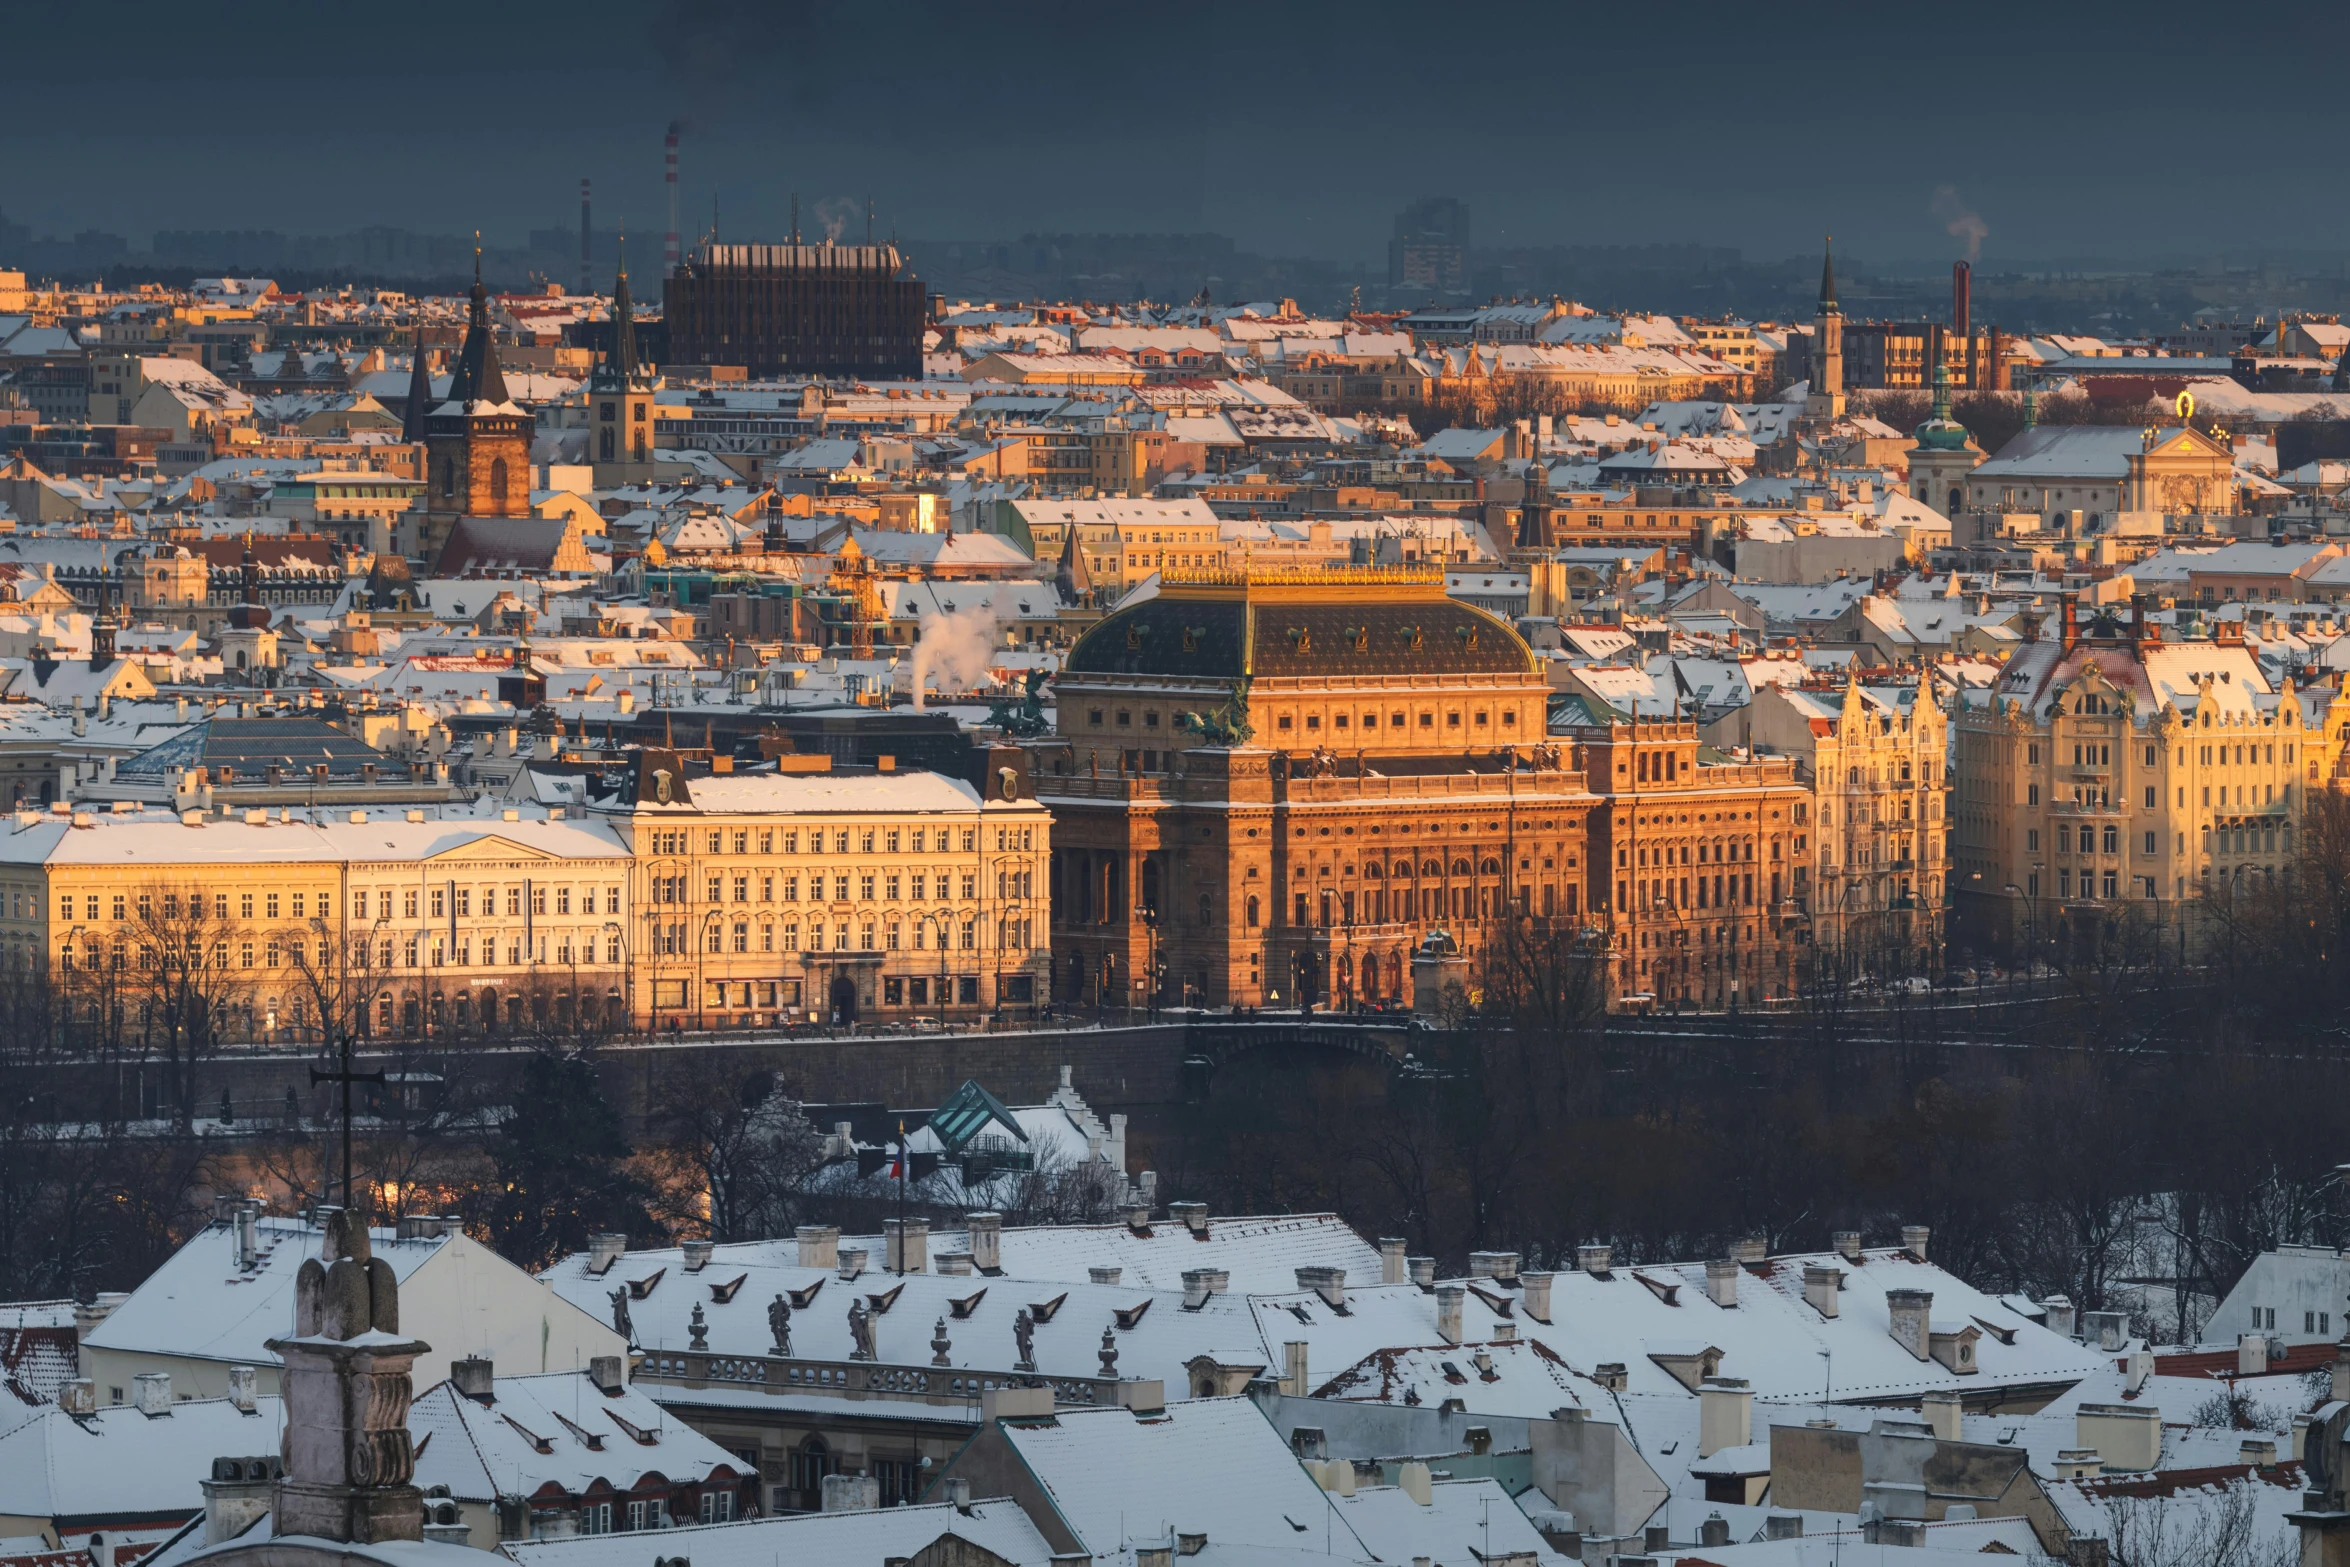 the cityscape shows several large buildings with some white roofs and snow on them